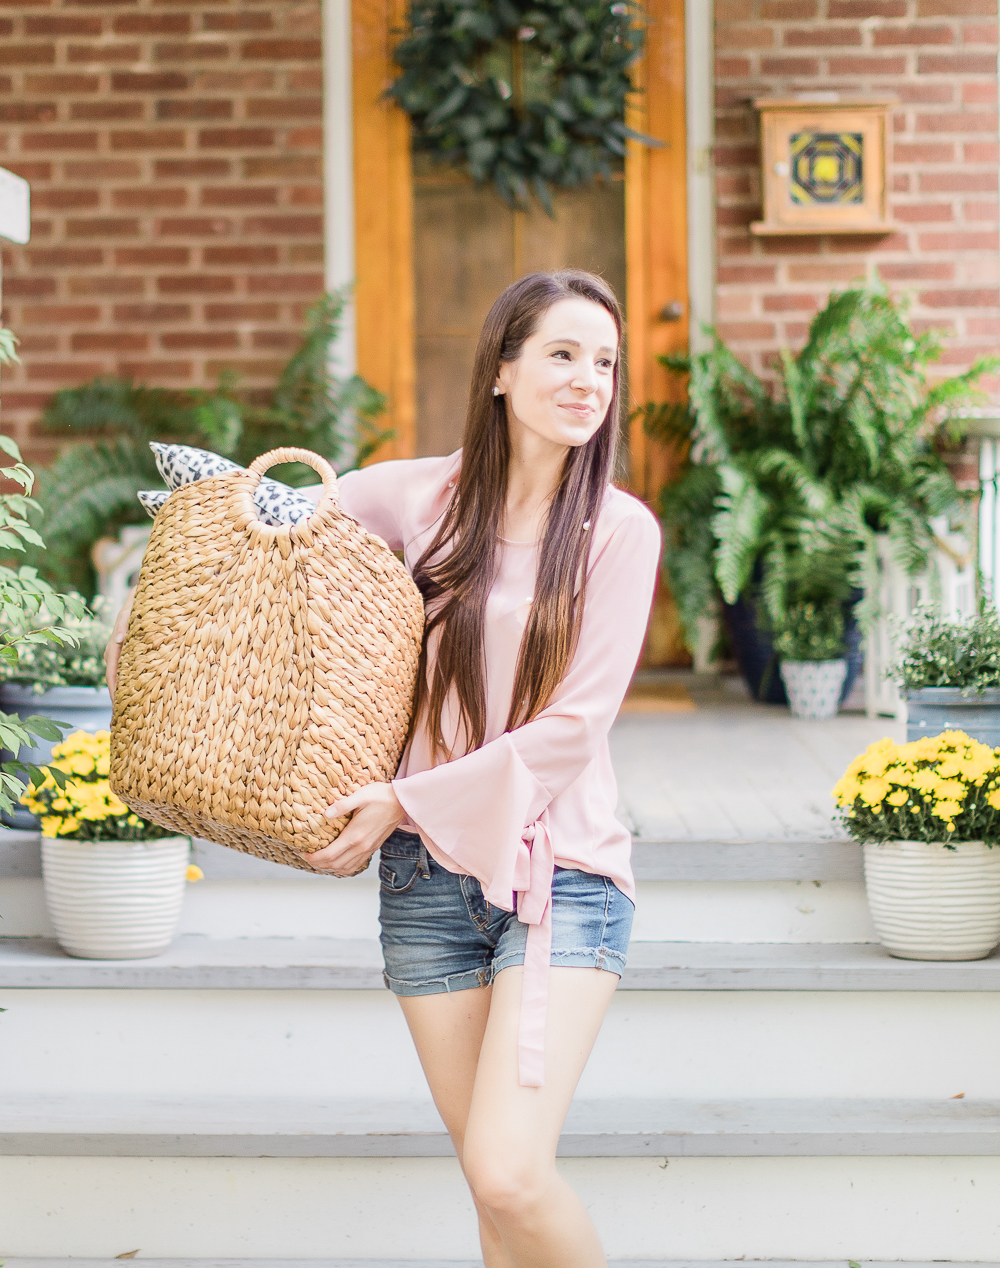 How to Make a Rental Feel Like Home: 5 Easy Decorating Tips for Renters from southern lifestyle blogger Stephanie Ziajka from Diary of a Debutante, front porch decor ideas, CORT Furniture Rental review, decorating hacks for renters